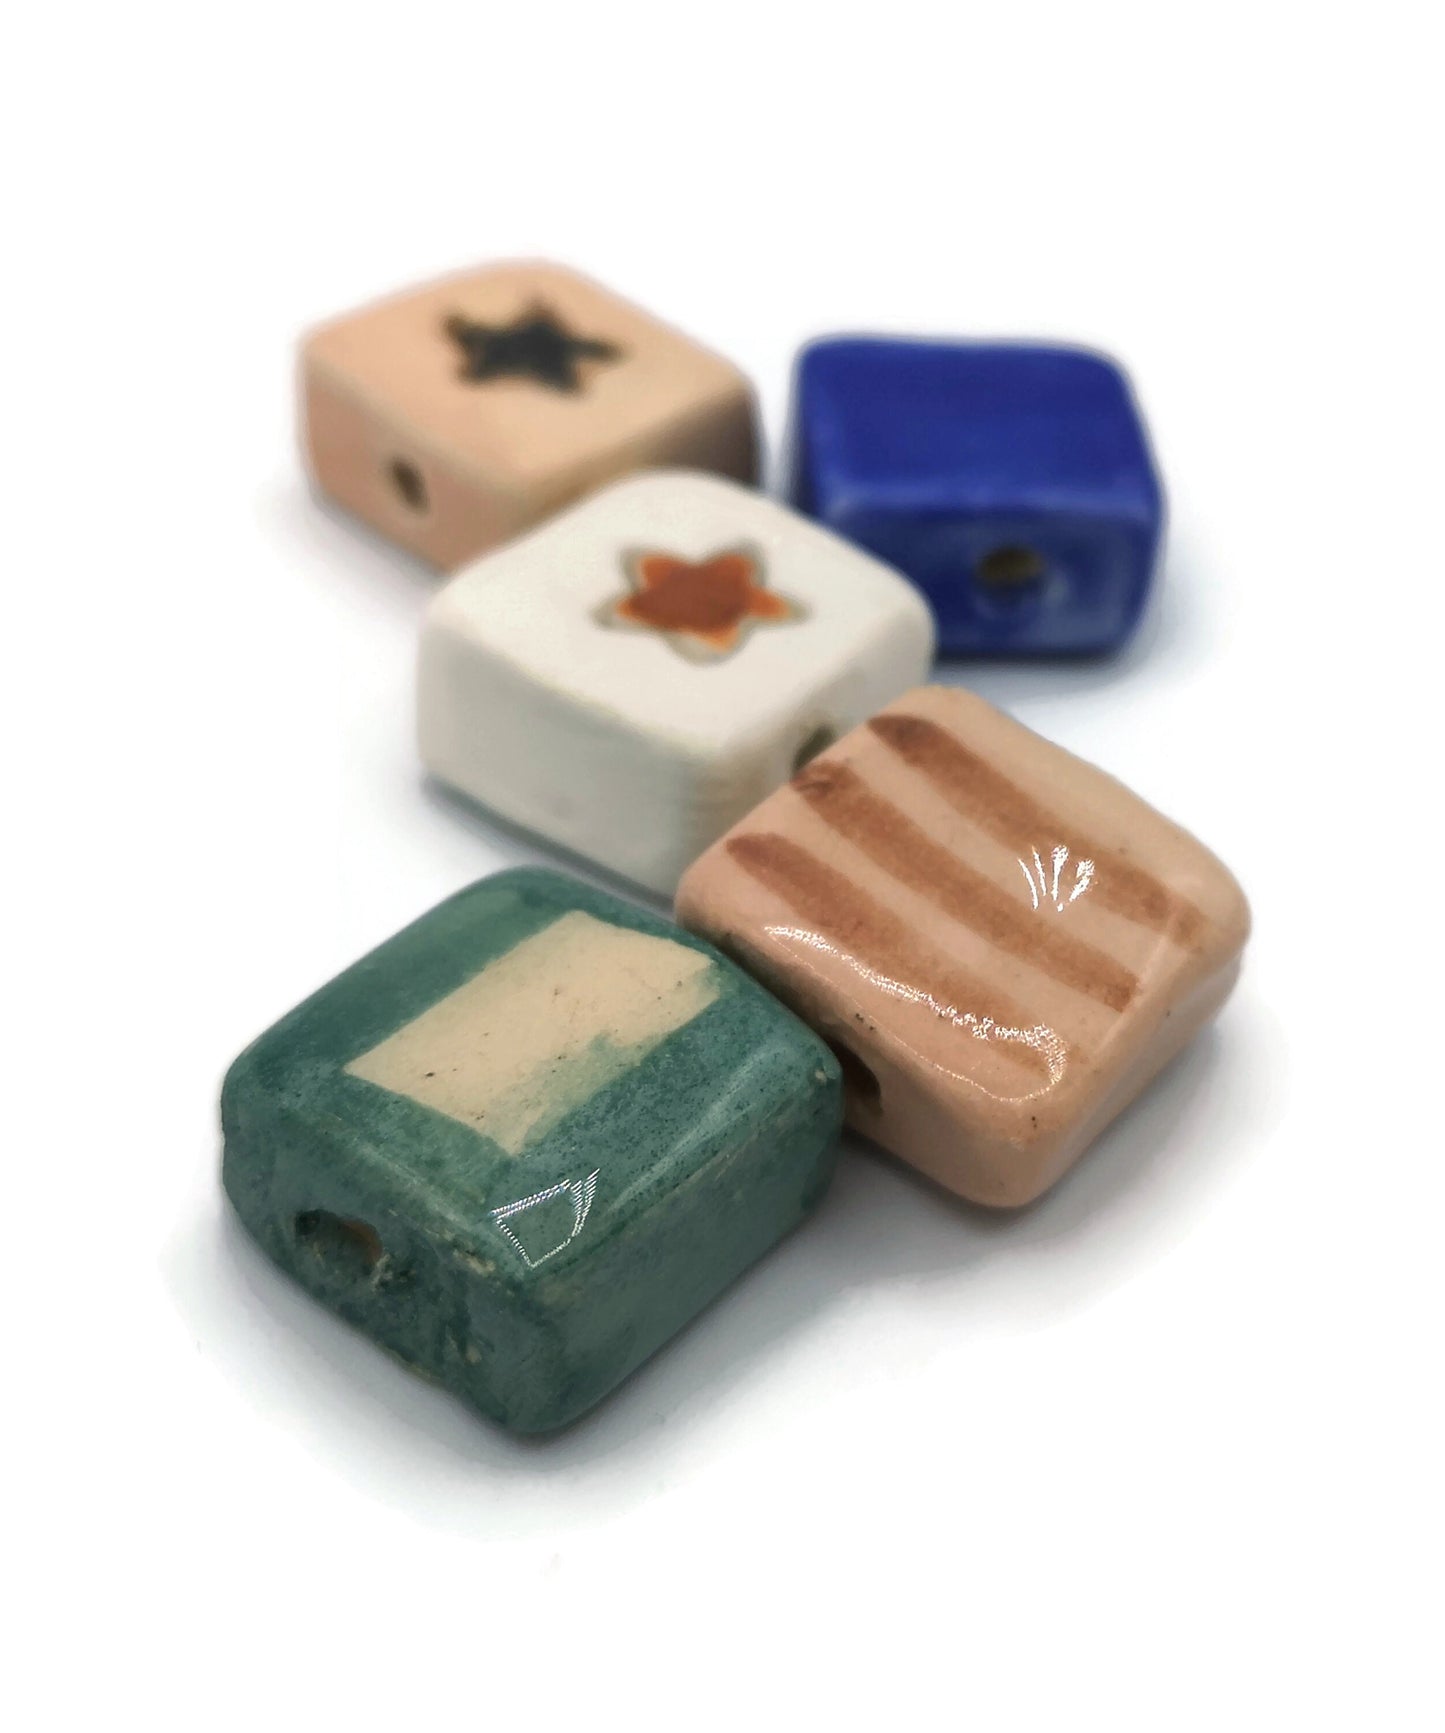 unique beads for jewelry making, square beads, set of 5 assorted beads, large ceramic beads for jewelry making supplies, craft beads, best - Ceramica Ana Rafael